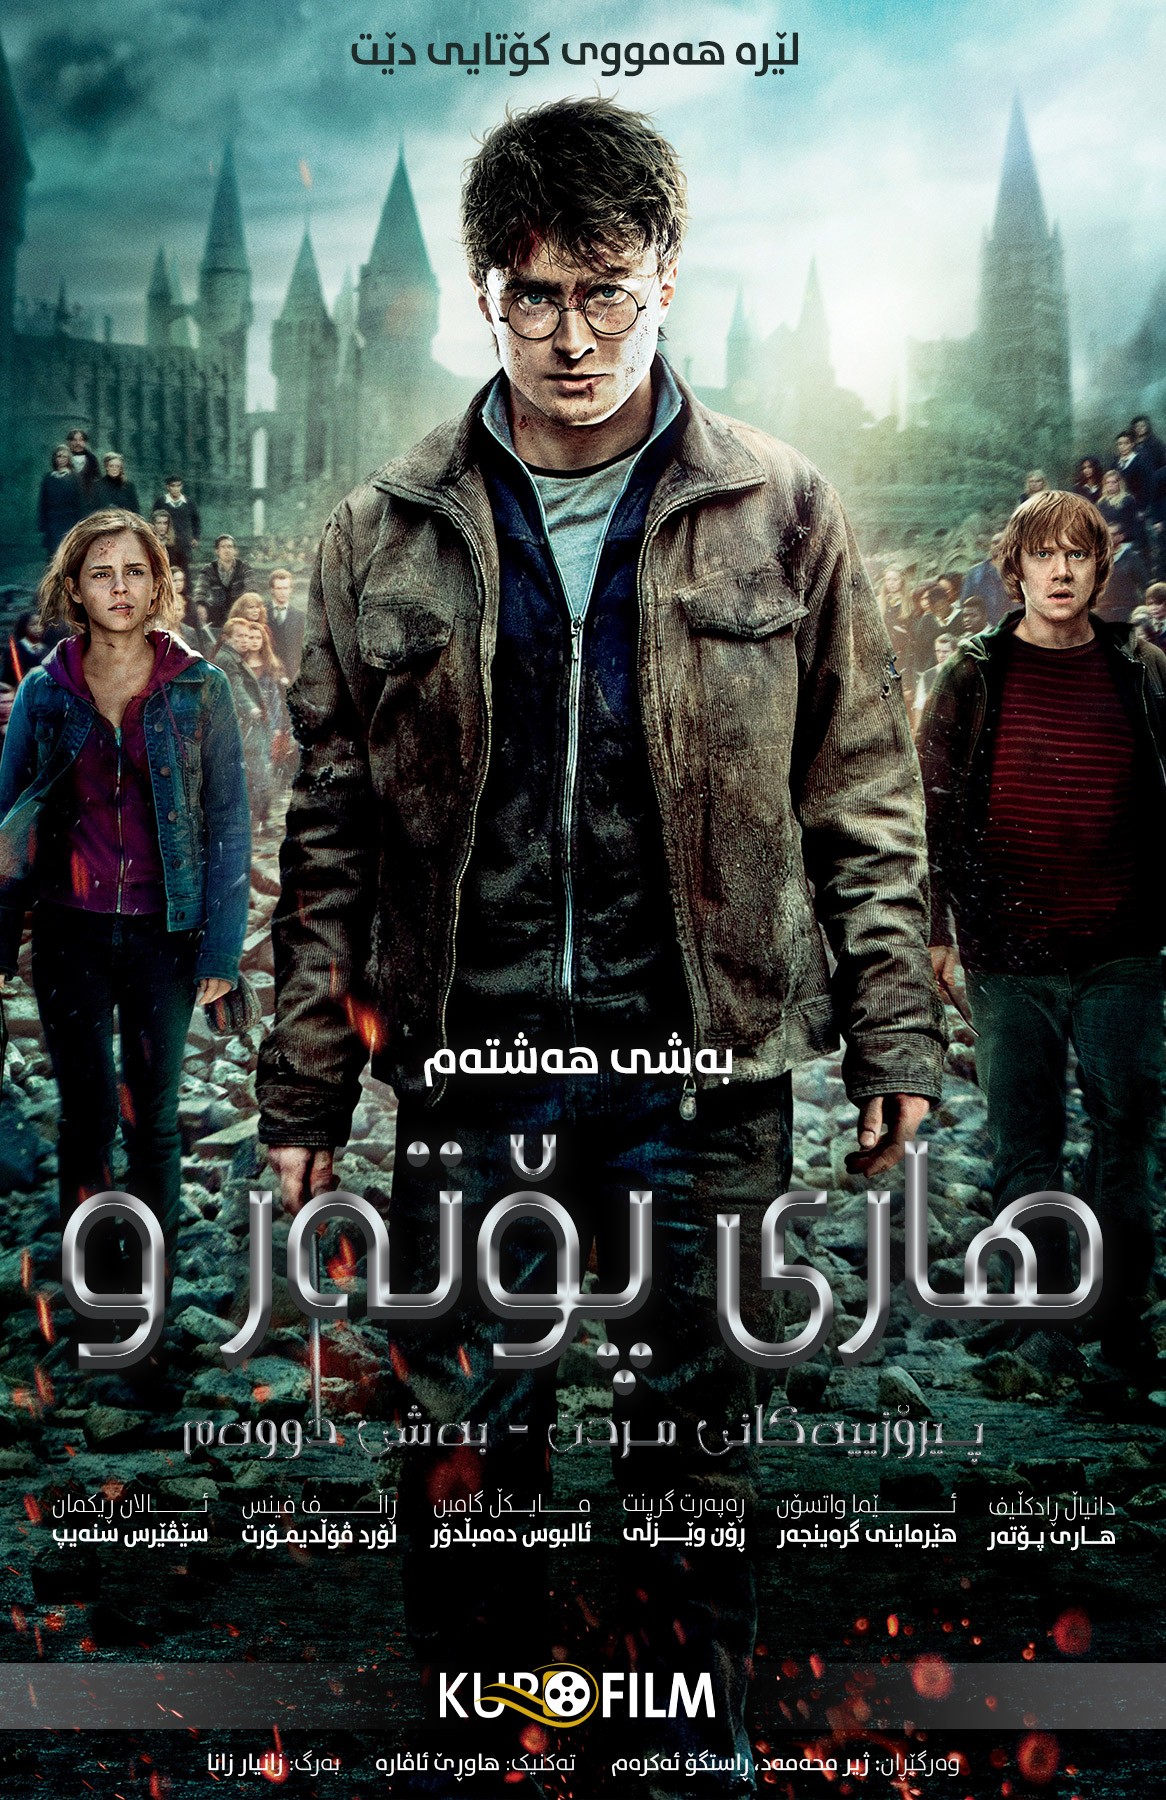 Harry Potter and the Deathly Hallows: Part 2  (2011)